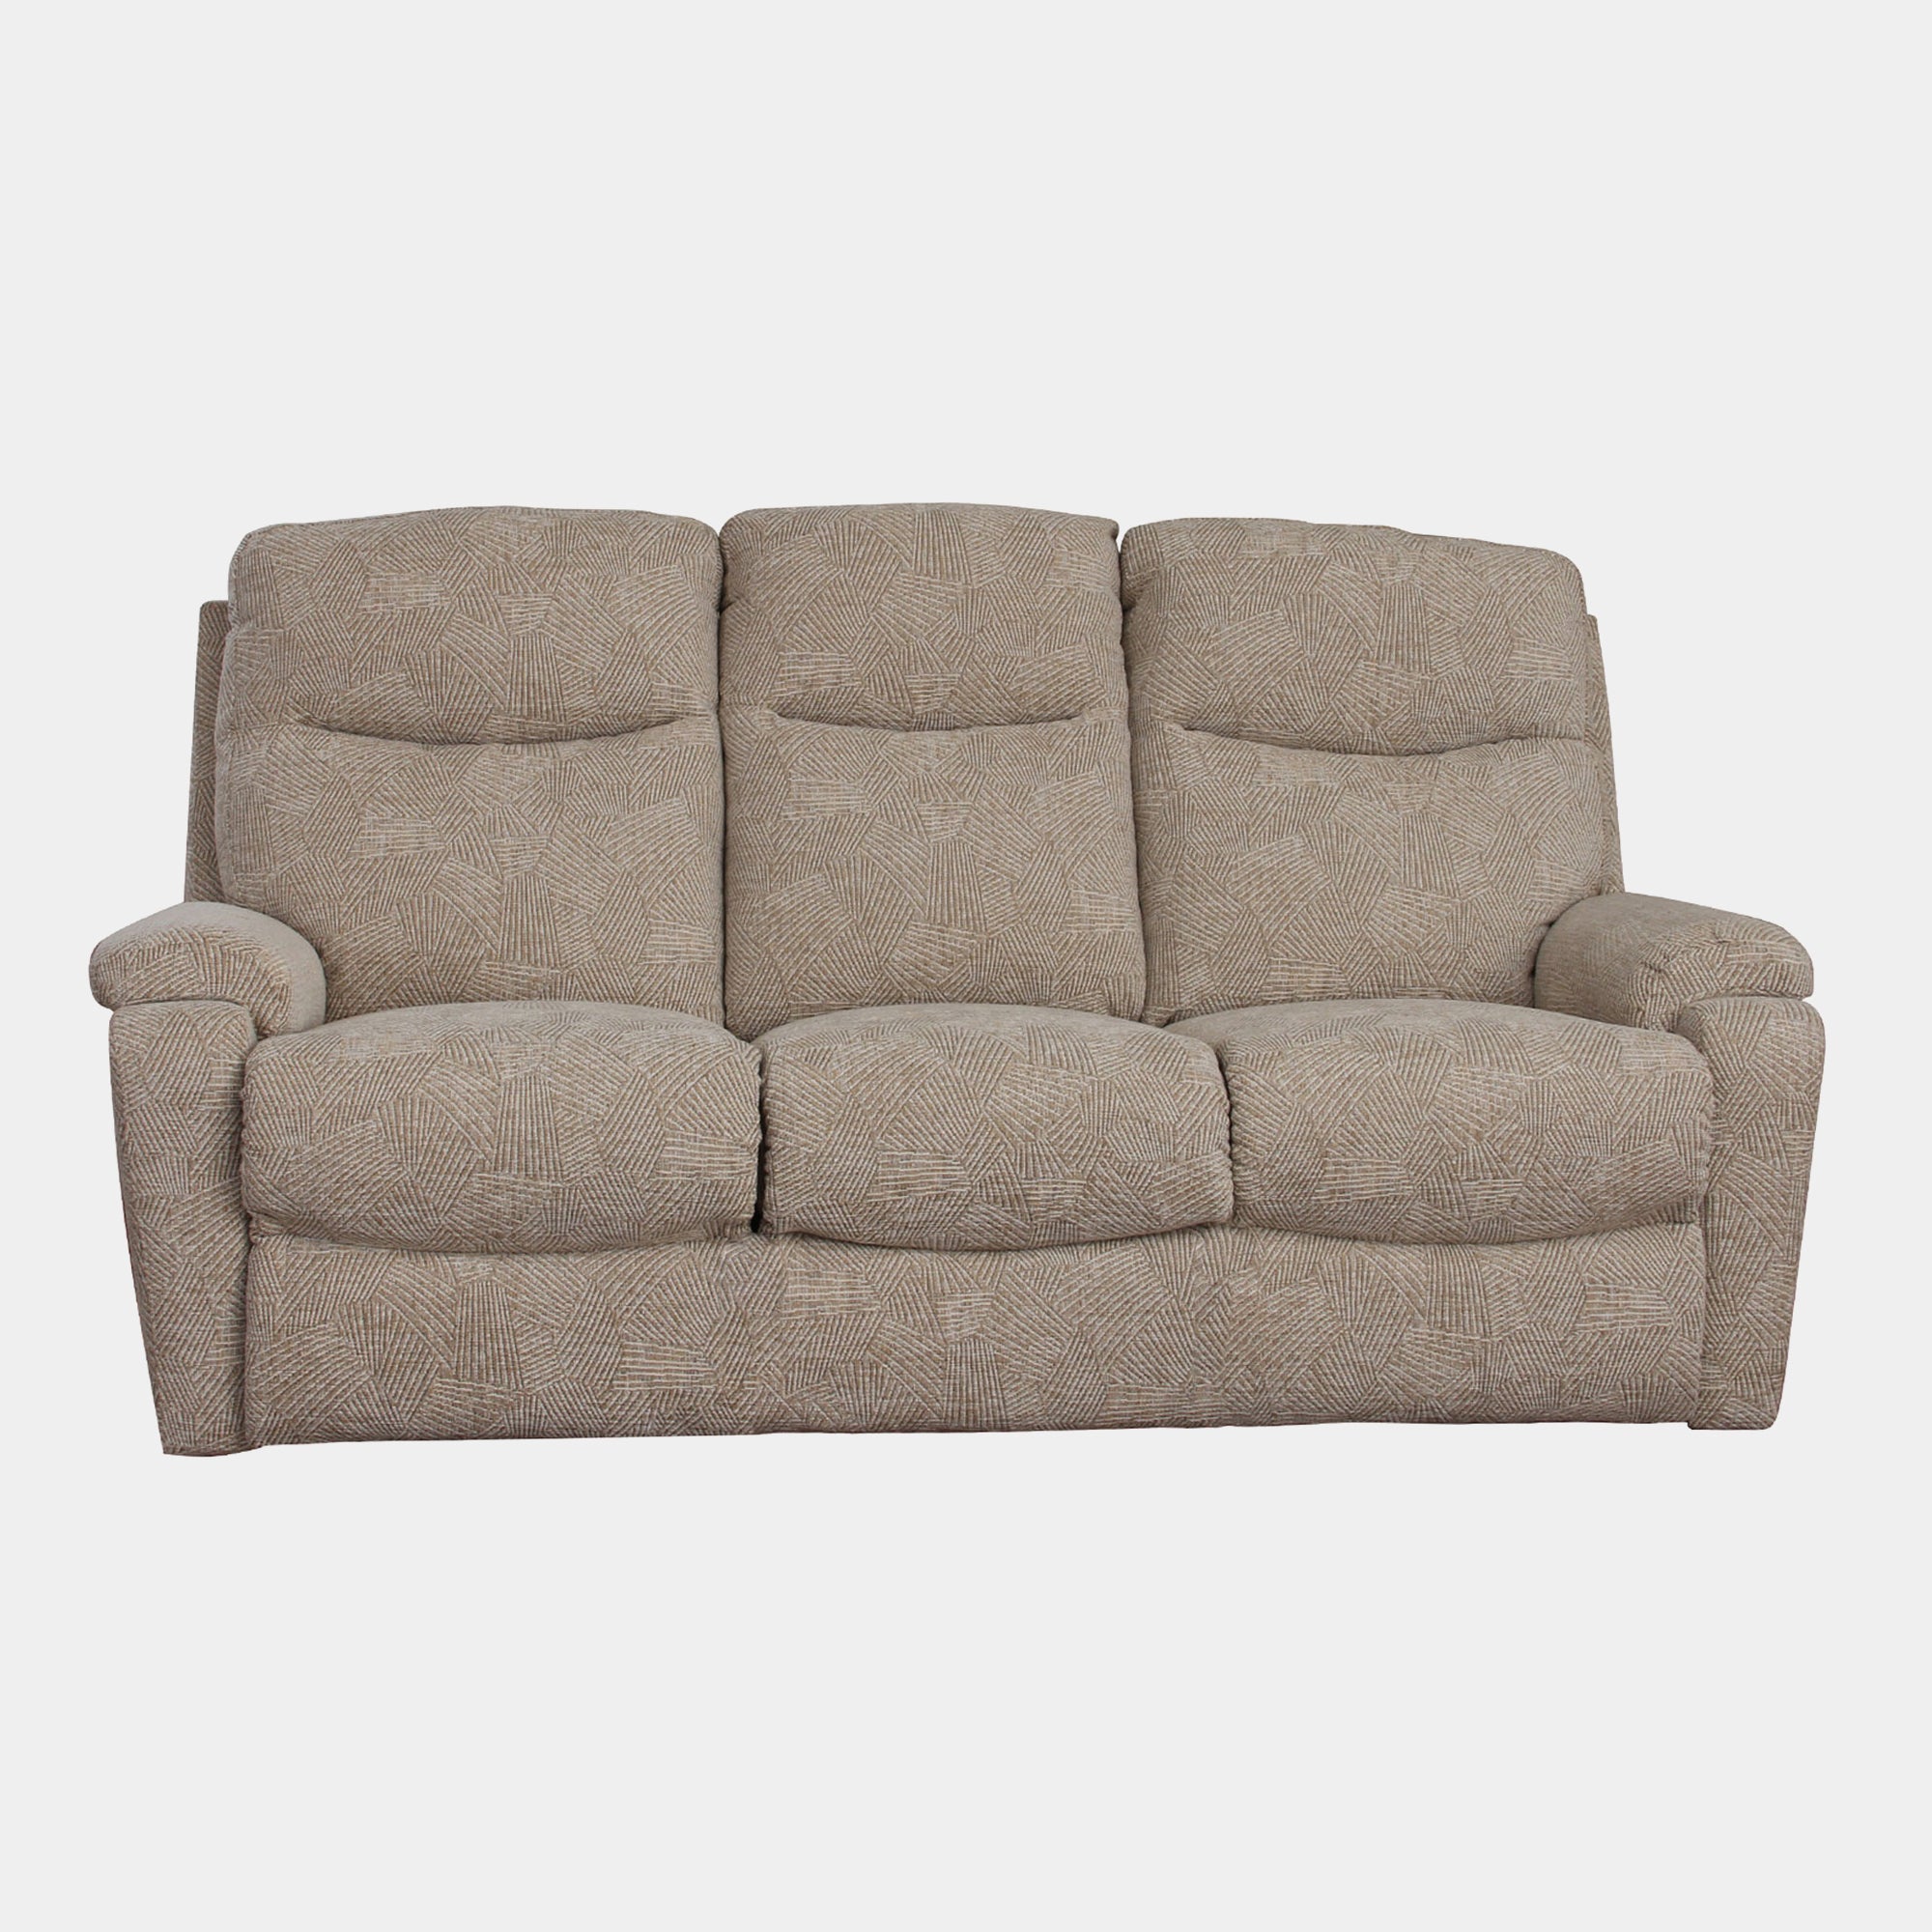 3 Seat Static Split Sofa (1 Arm 1 Seat/1Arm 2 Seat) In Fabric Synergy